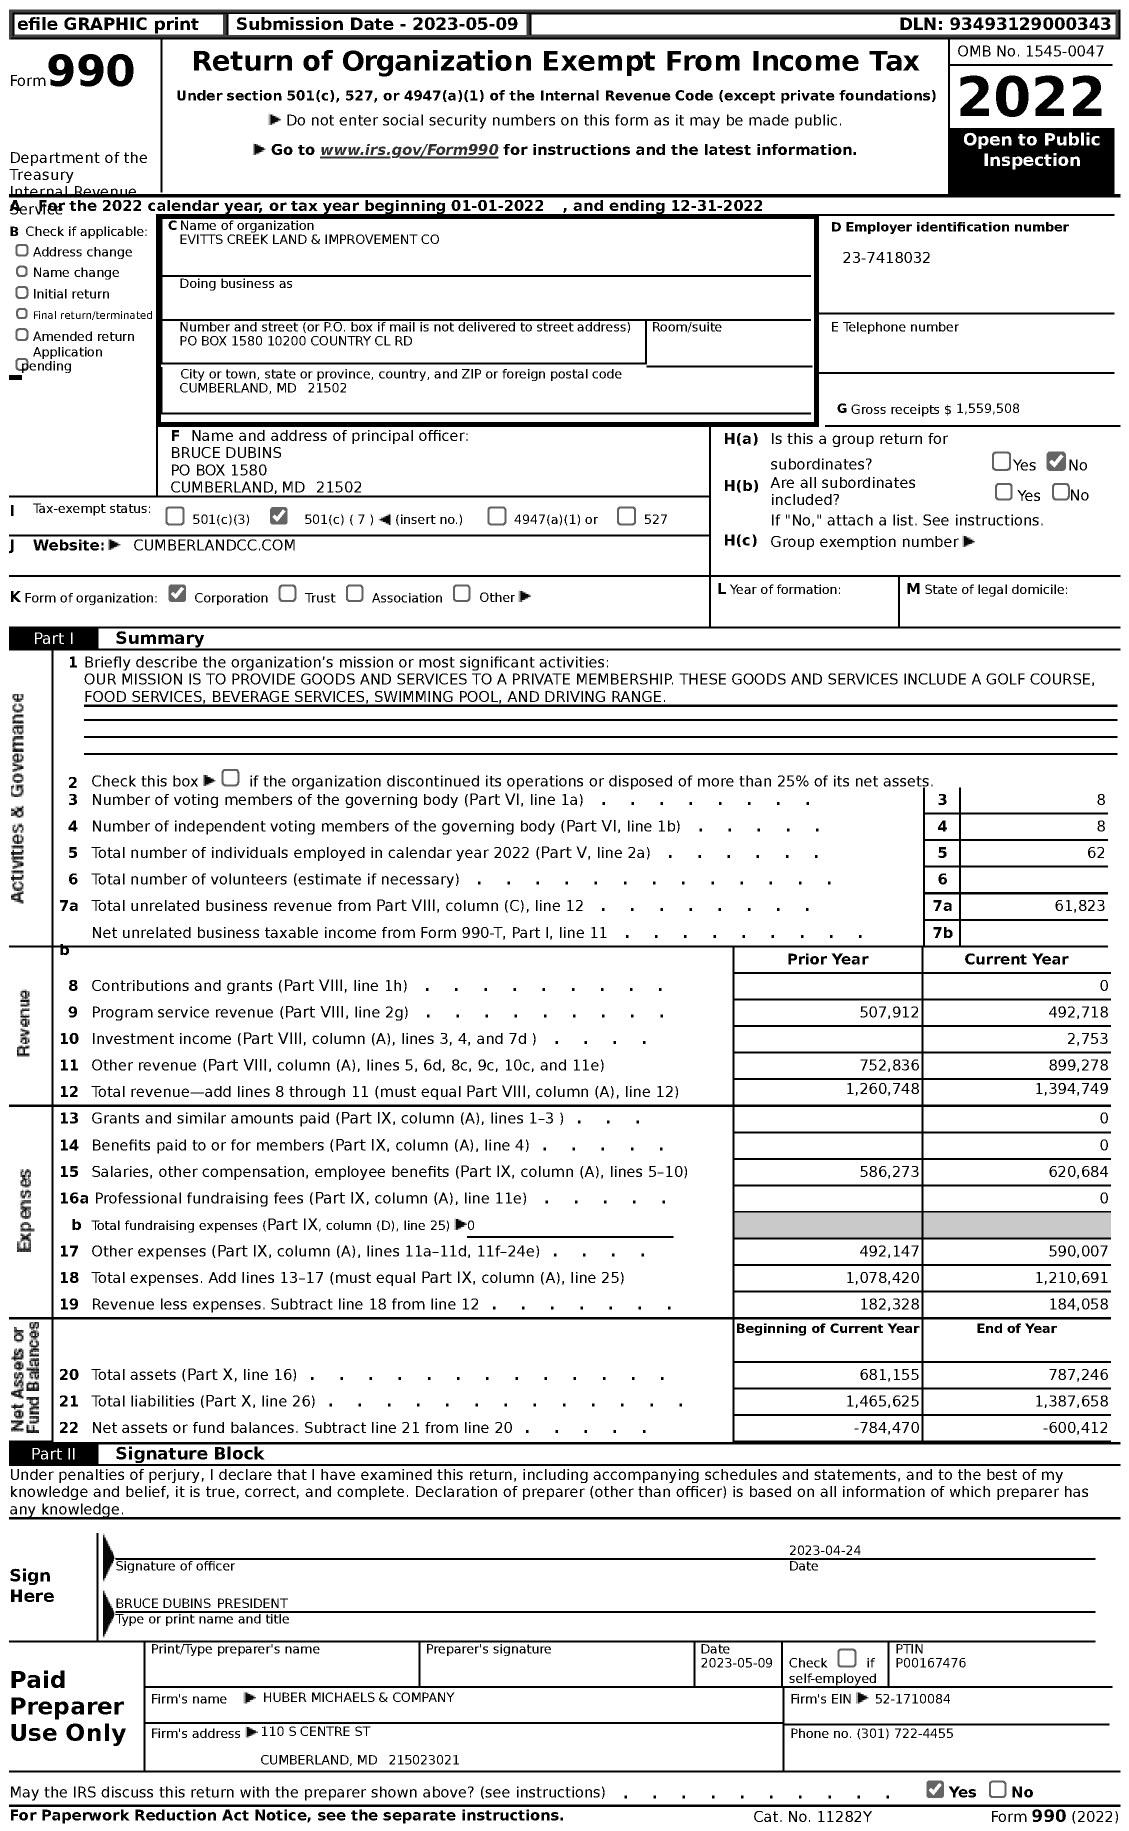 Image of first page of 2022 Form 990 for Evitts Creek Land and Improvement